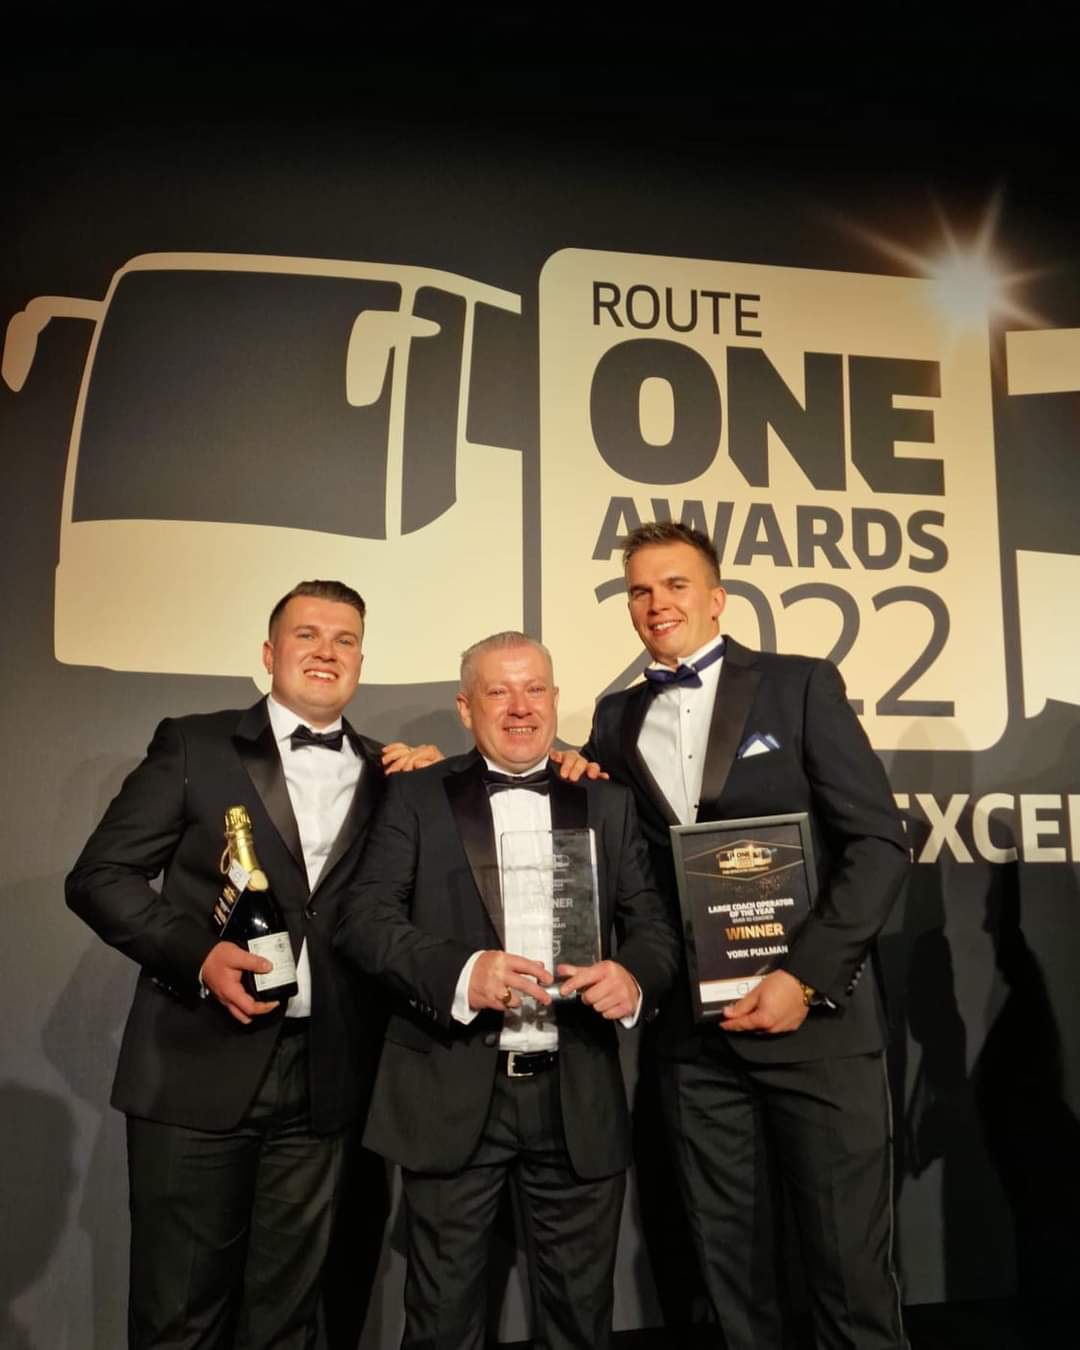 We’re officially the UK’s Best Coach Operator of the Year!